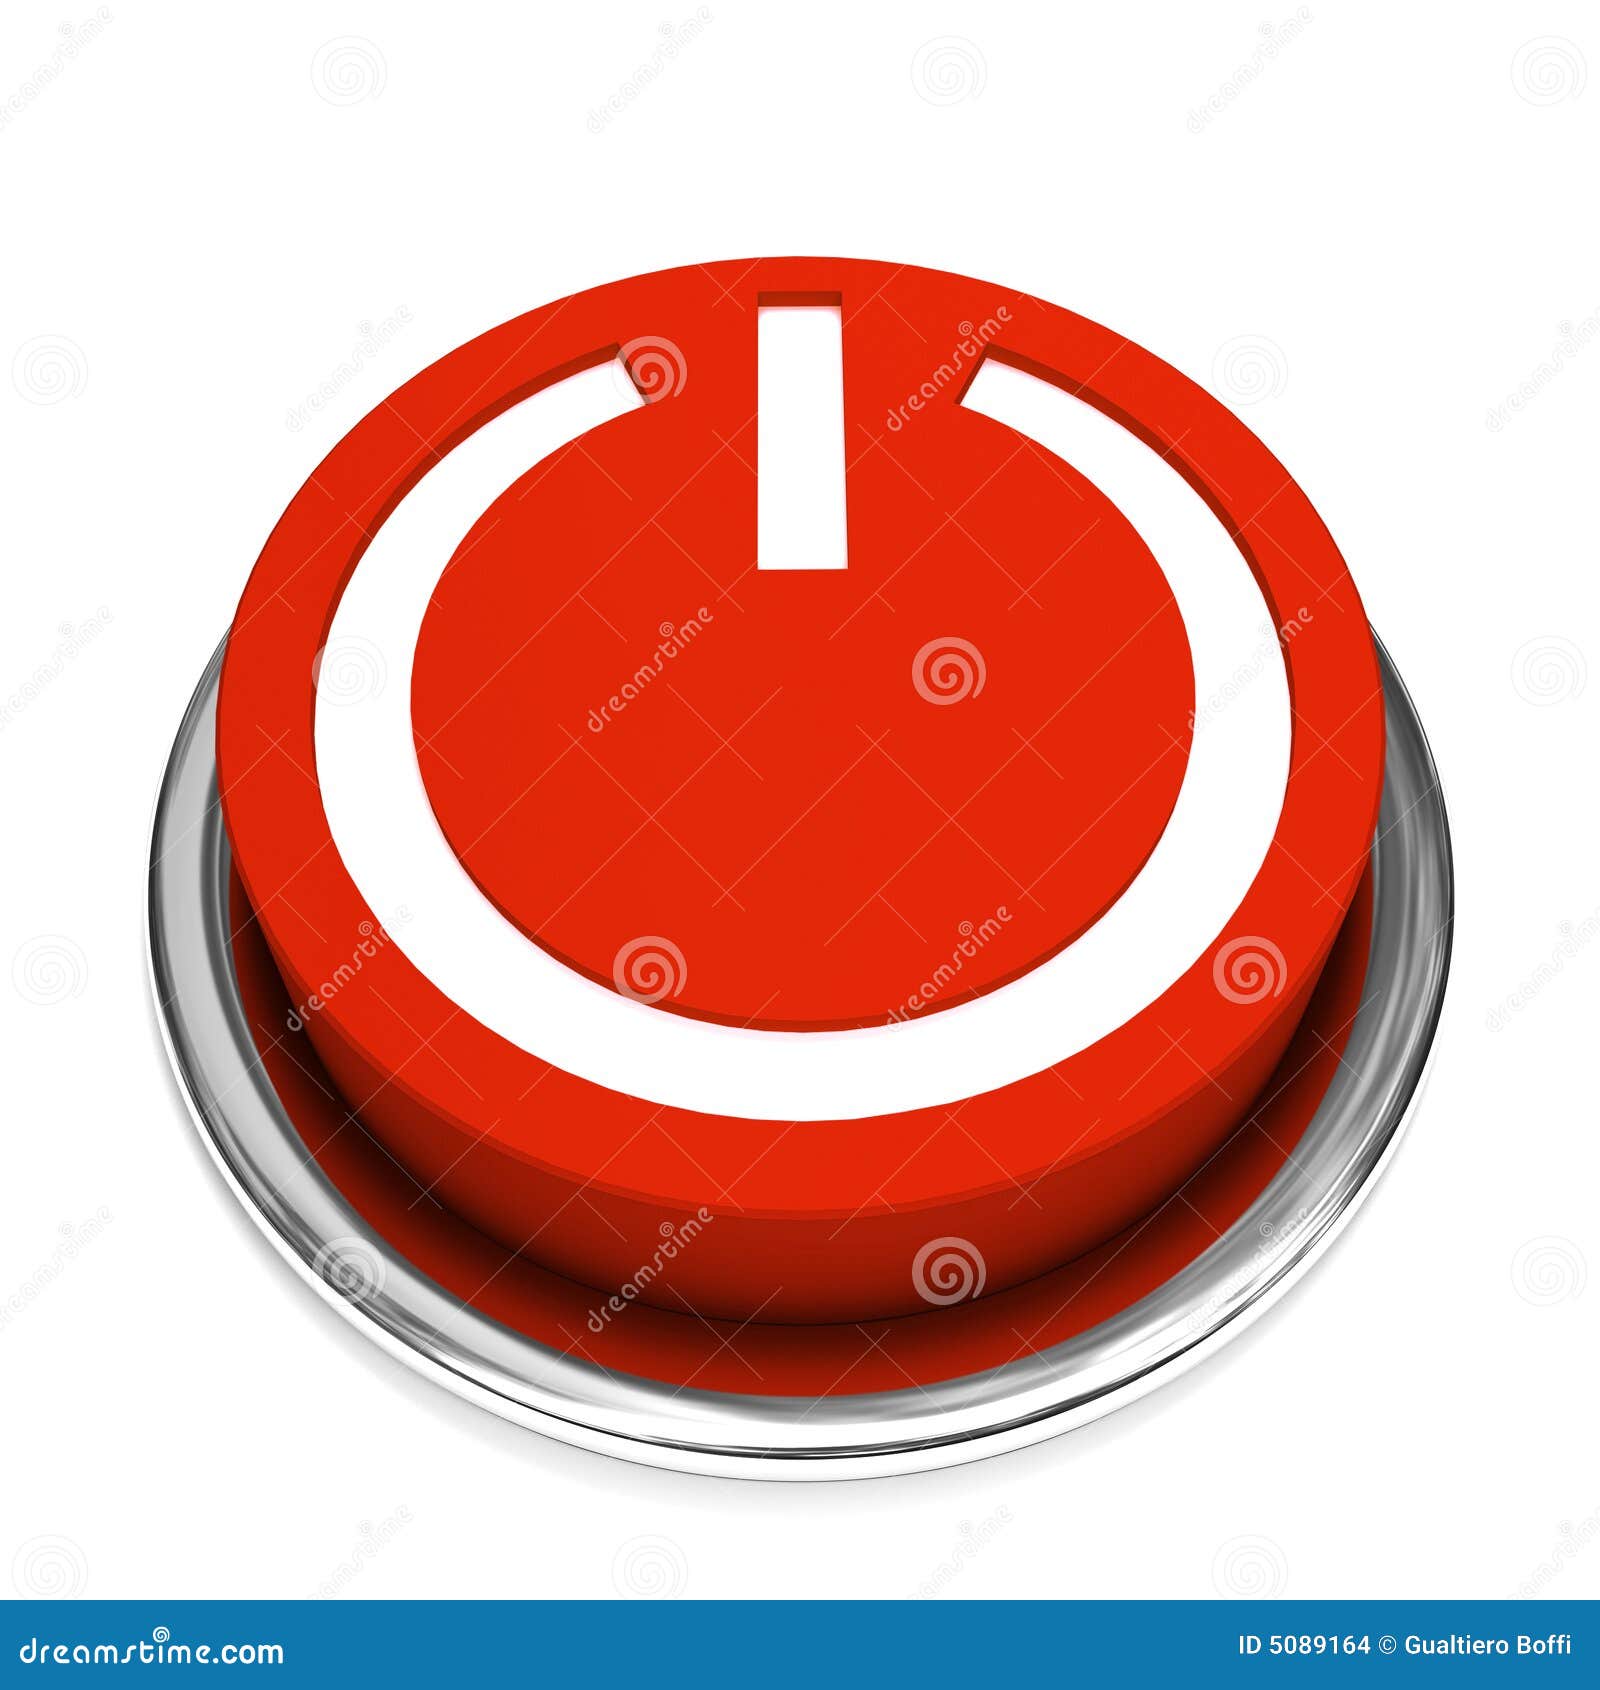 push the red button website